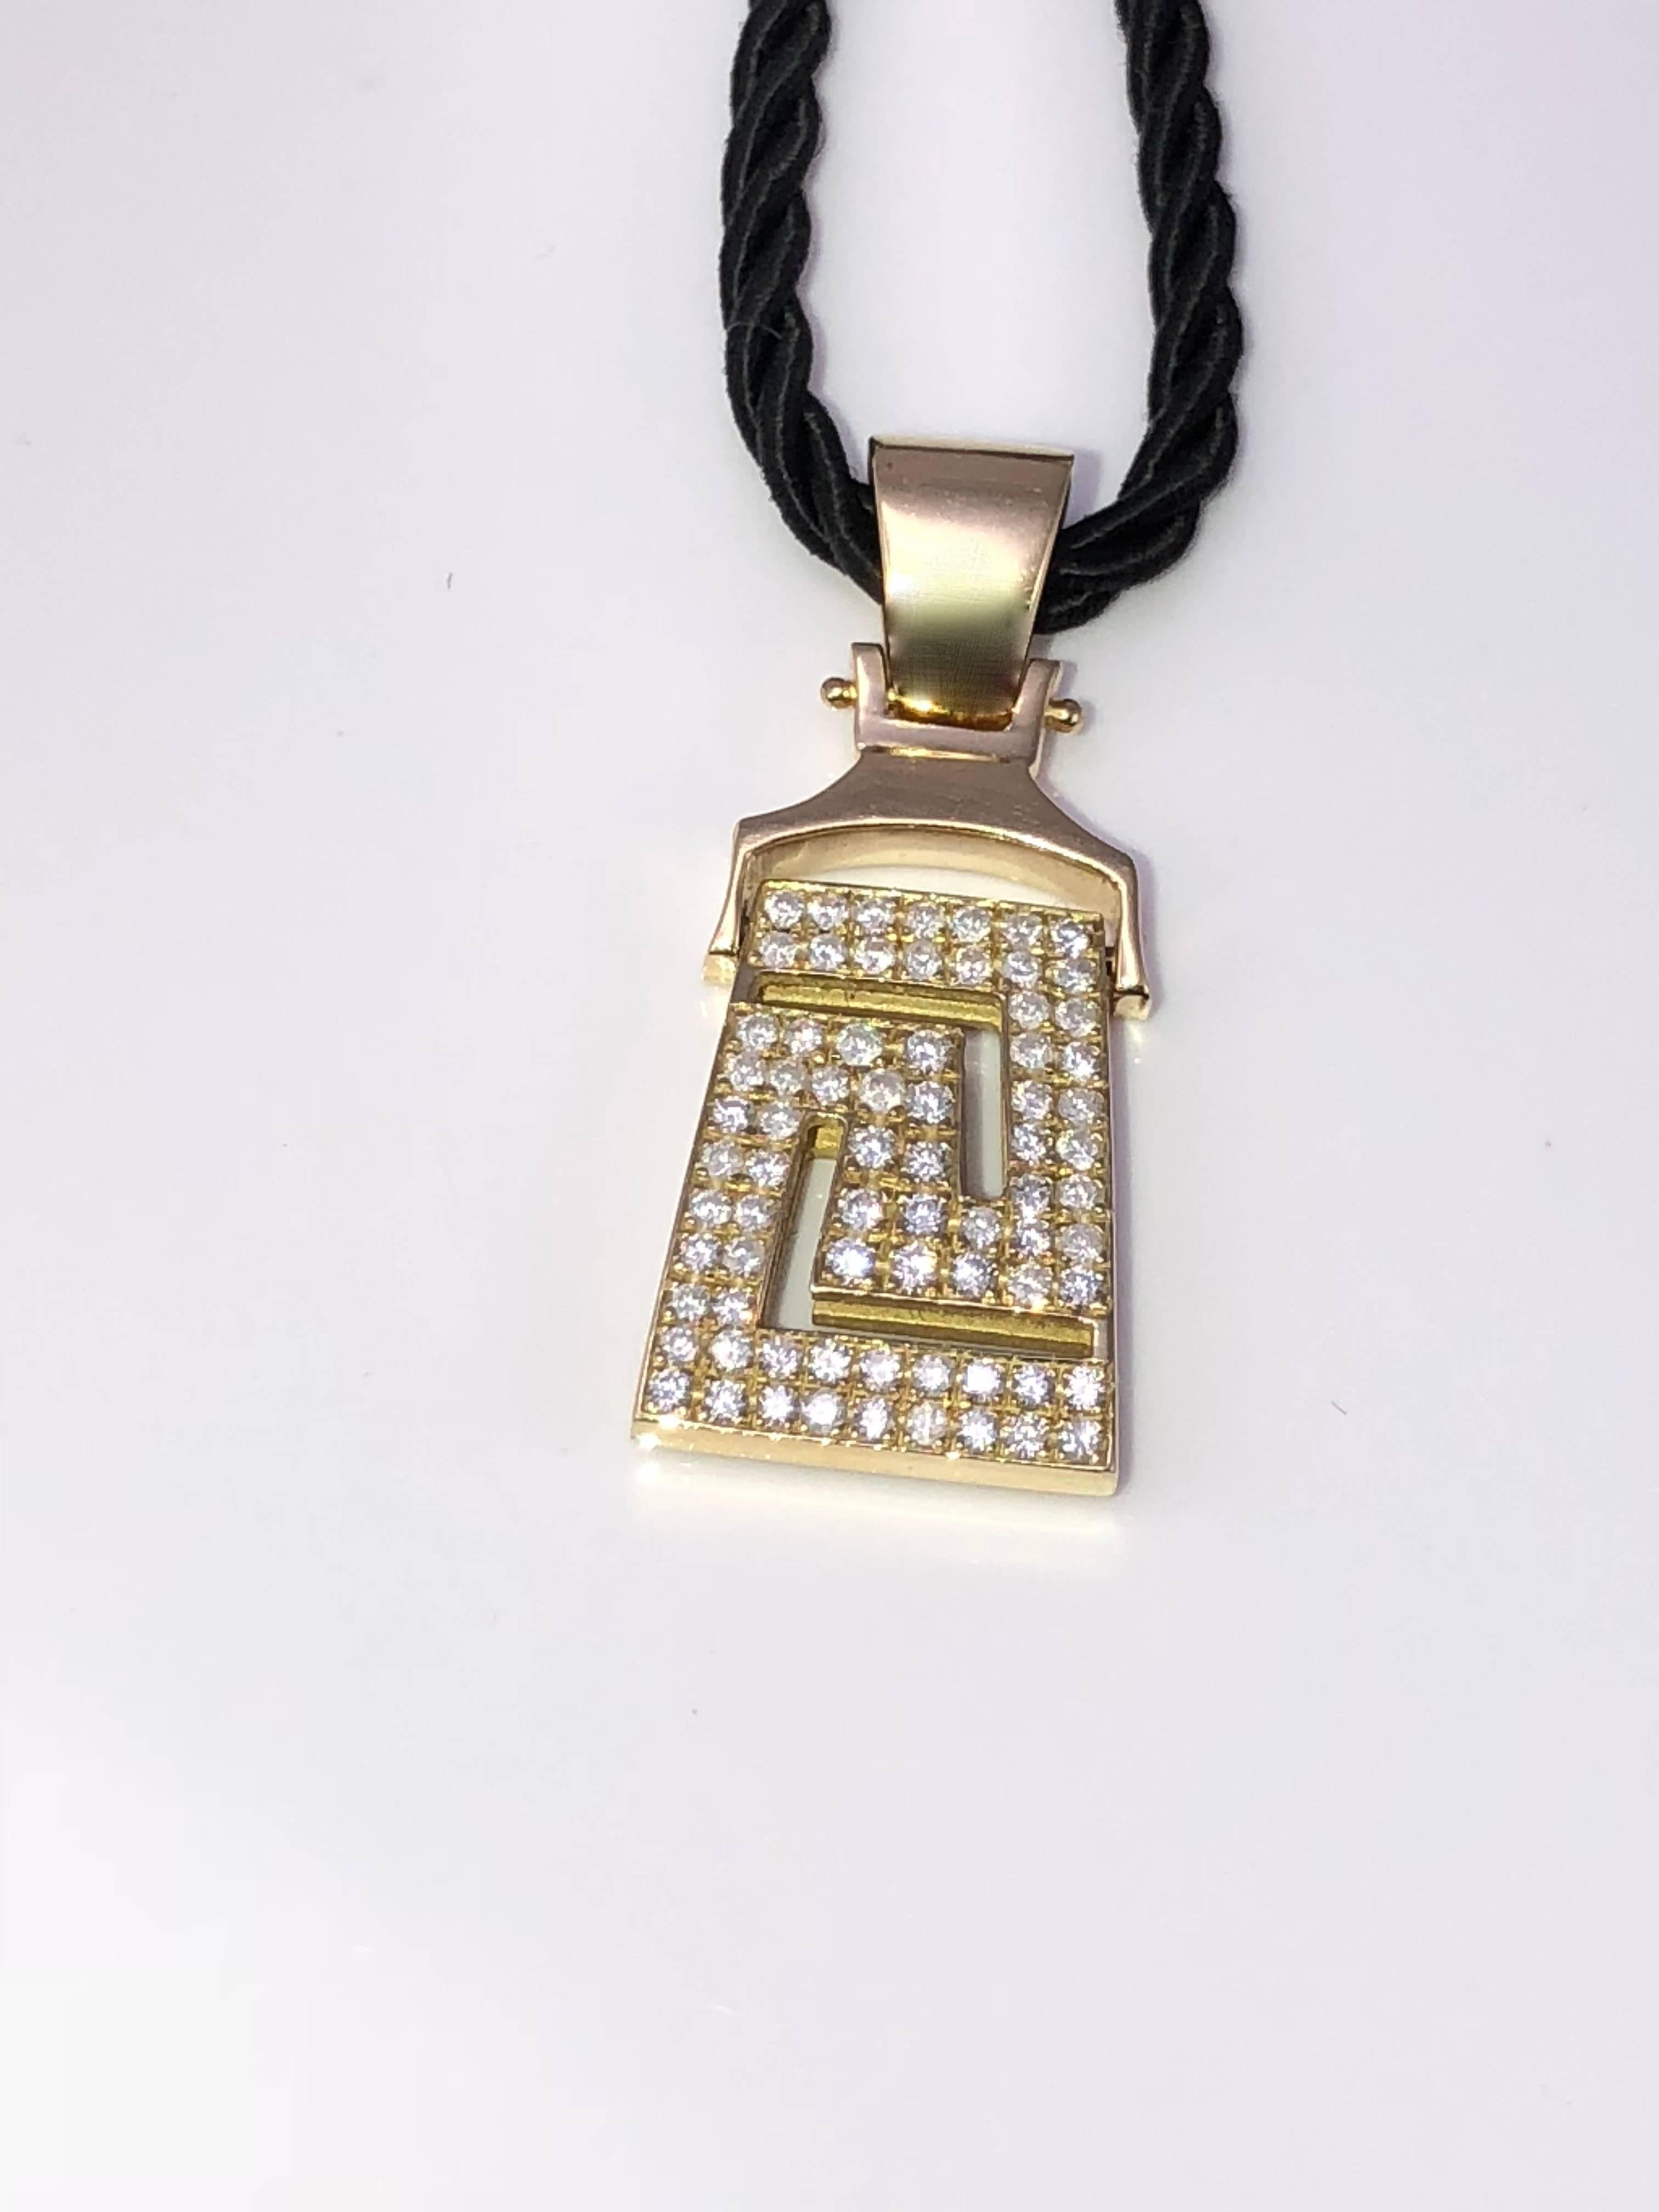 S.Georgios designer 18 Karat Yellow Gold Pendant Necklace with Diamonds shaping the Greek Key design symbolizing eternity. The stunning pendant features Brilliant Cut White Diamonds total weight of 1.04 Carat and comes with 18-inch silk rope.
It can